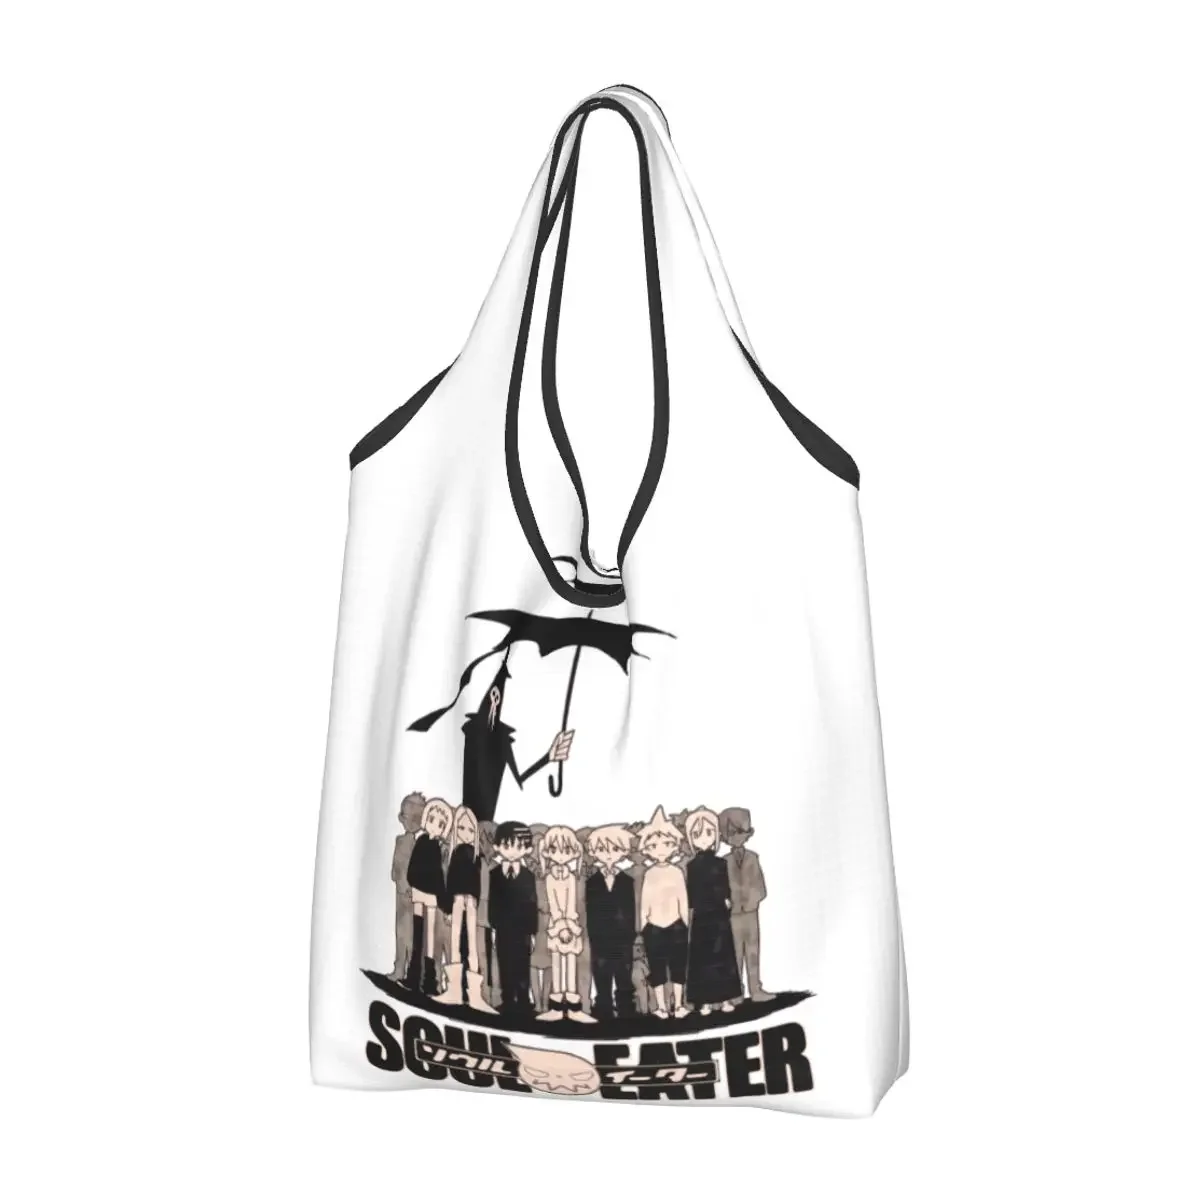 

Soul Eater Groceries Shopping Tote Bags Women Fashion Shinigami Death the Kid Shoulder Shopper Bags Large Capacity Handbags